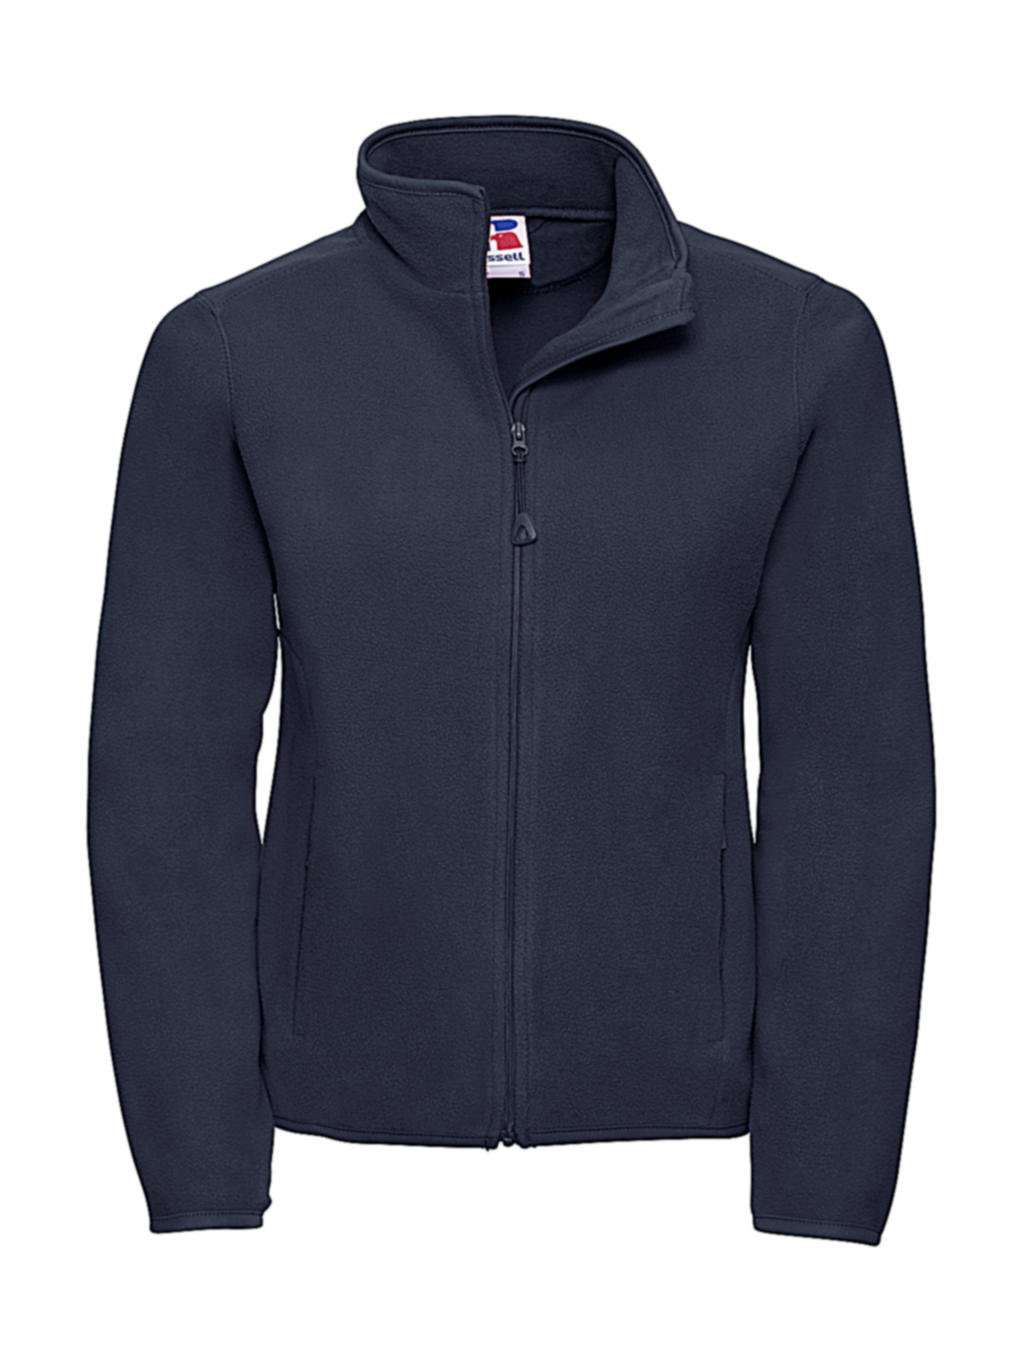  Ladies Fitted Full Zip Microfleece in Farbe French Navy